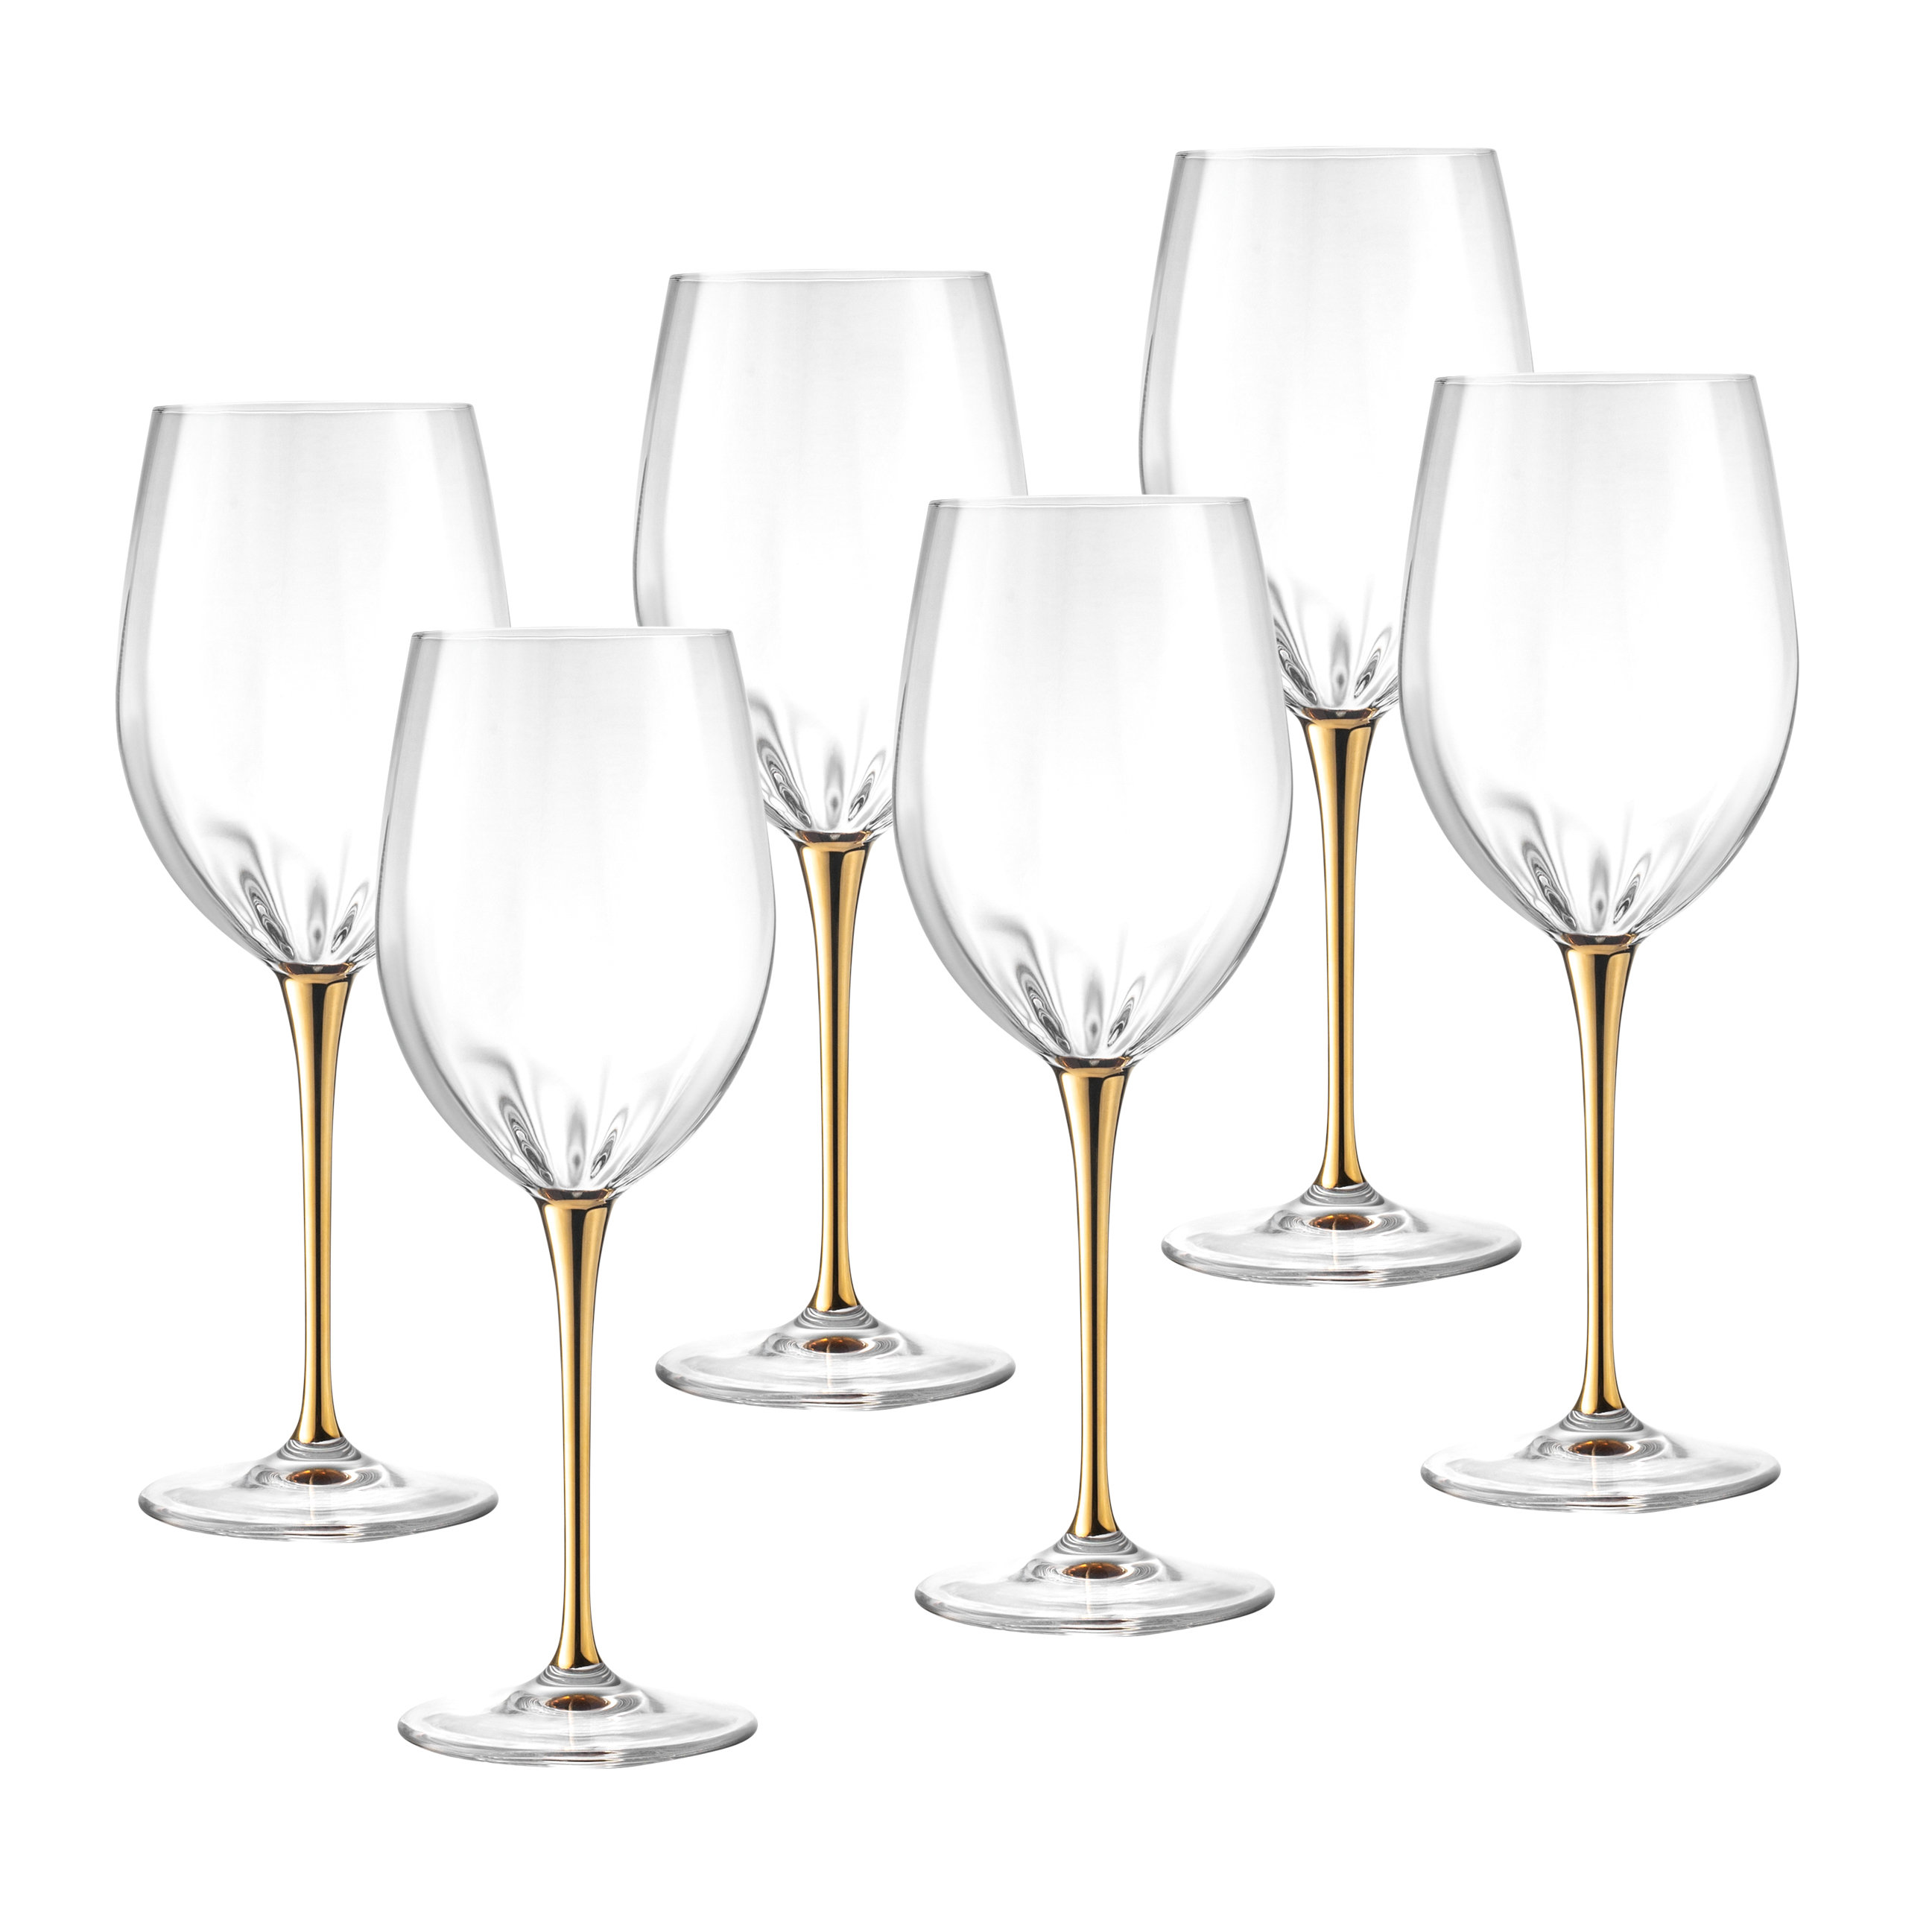 Colored Wine Glasses Set of 6 Crystal, 18Oz - Unique Fall Drinking